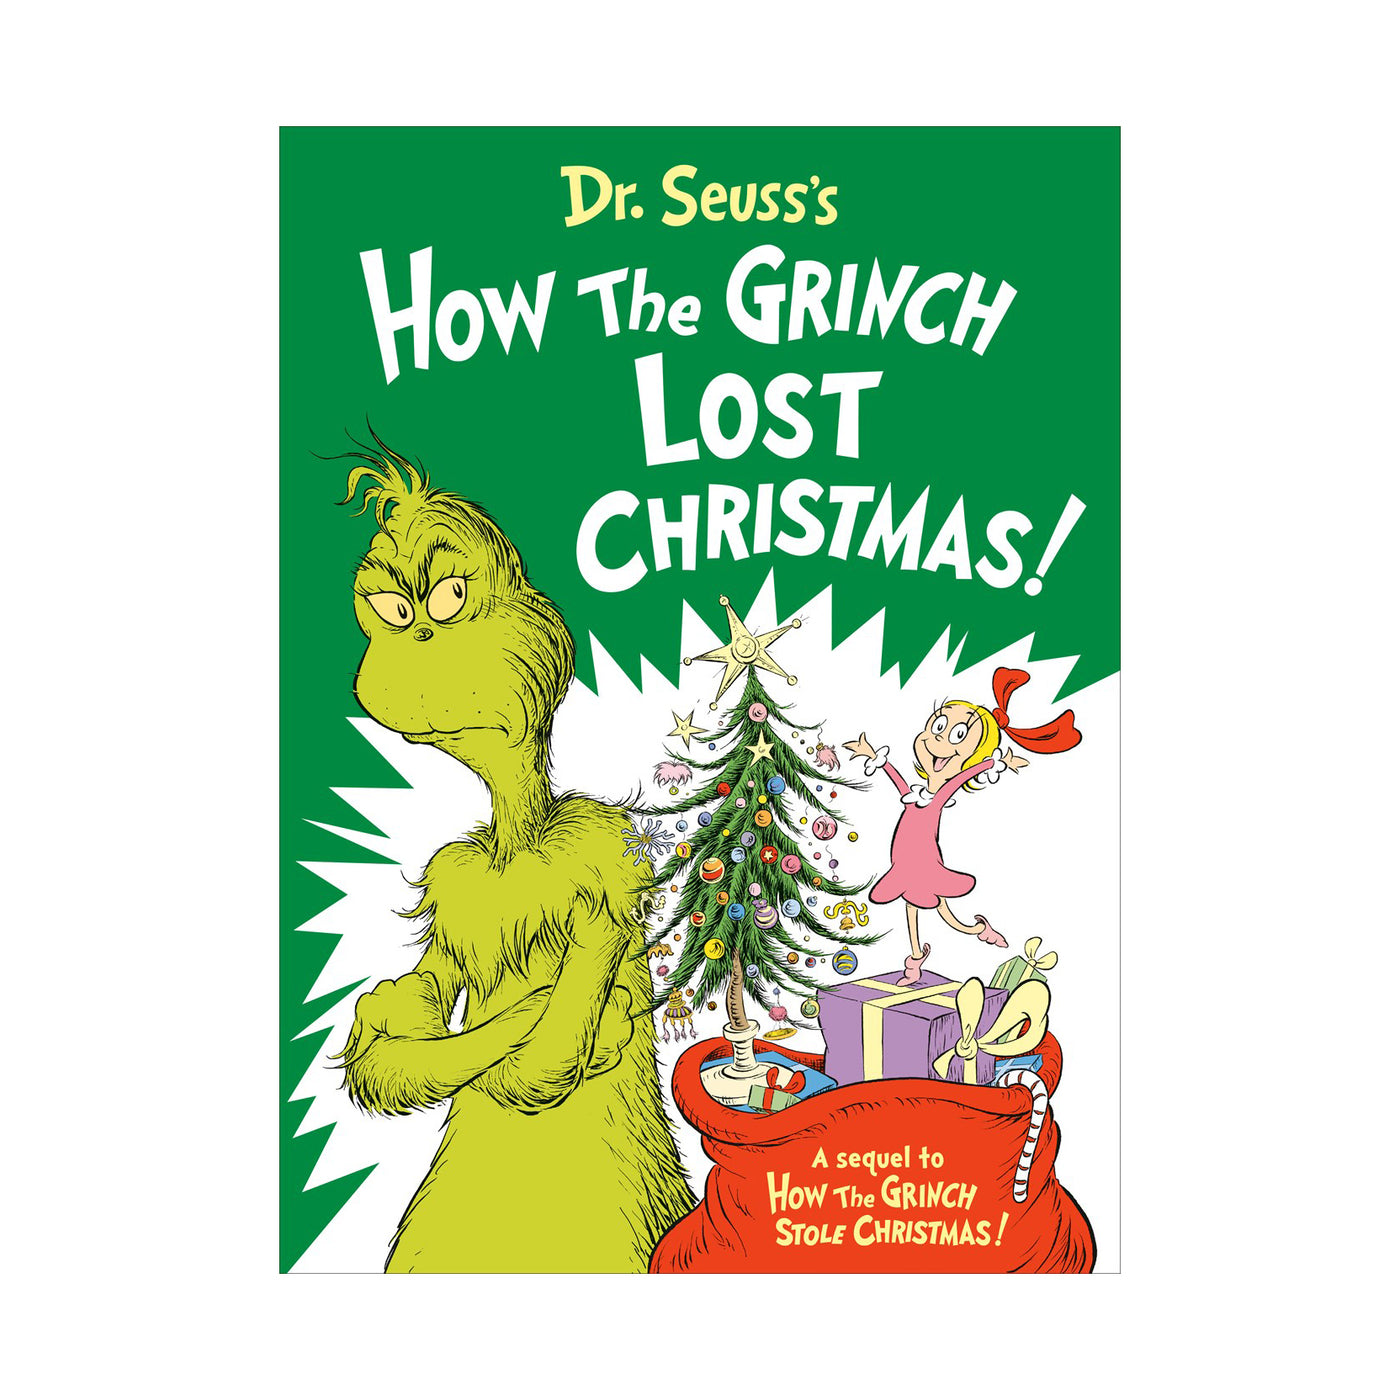 Dr. Suess's How the Grinch Lost Christmas!